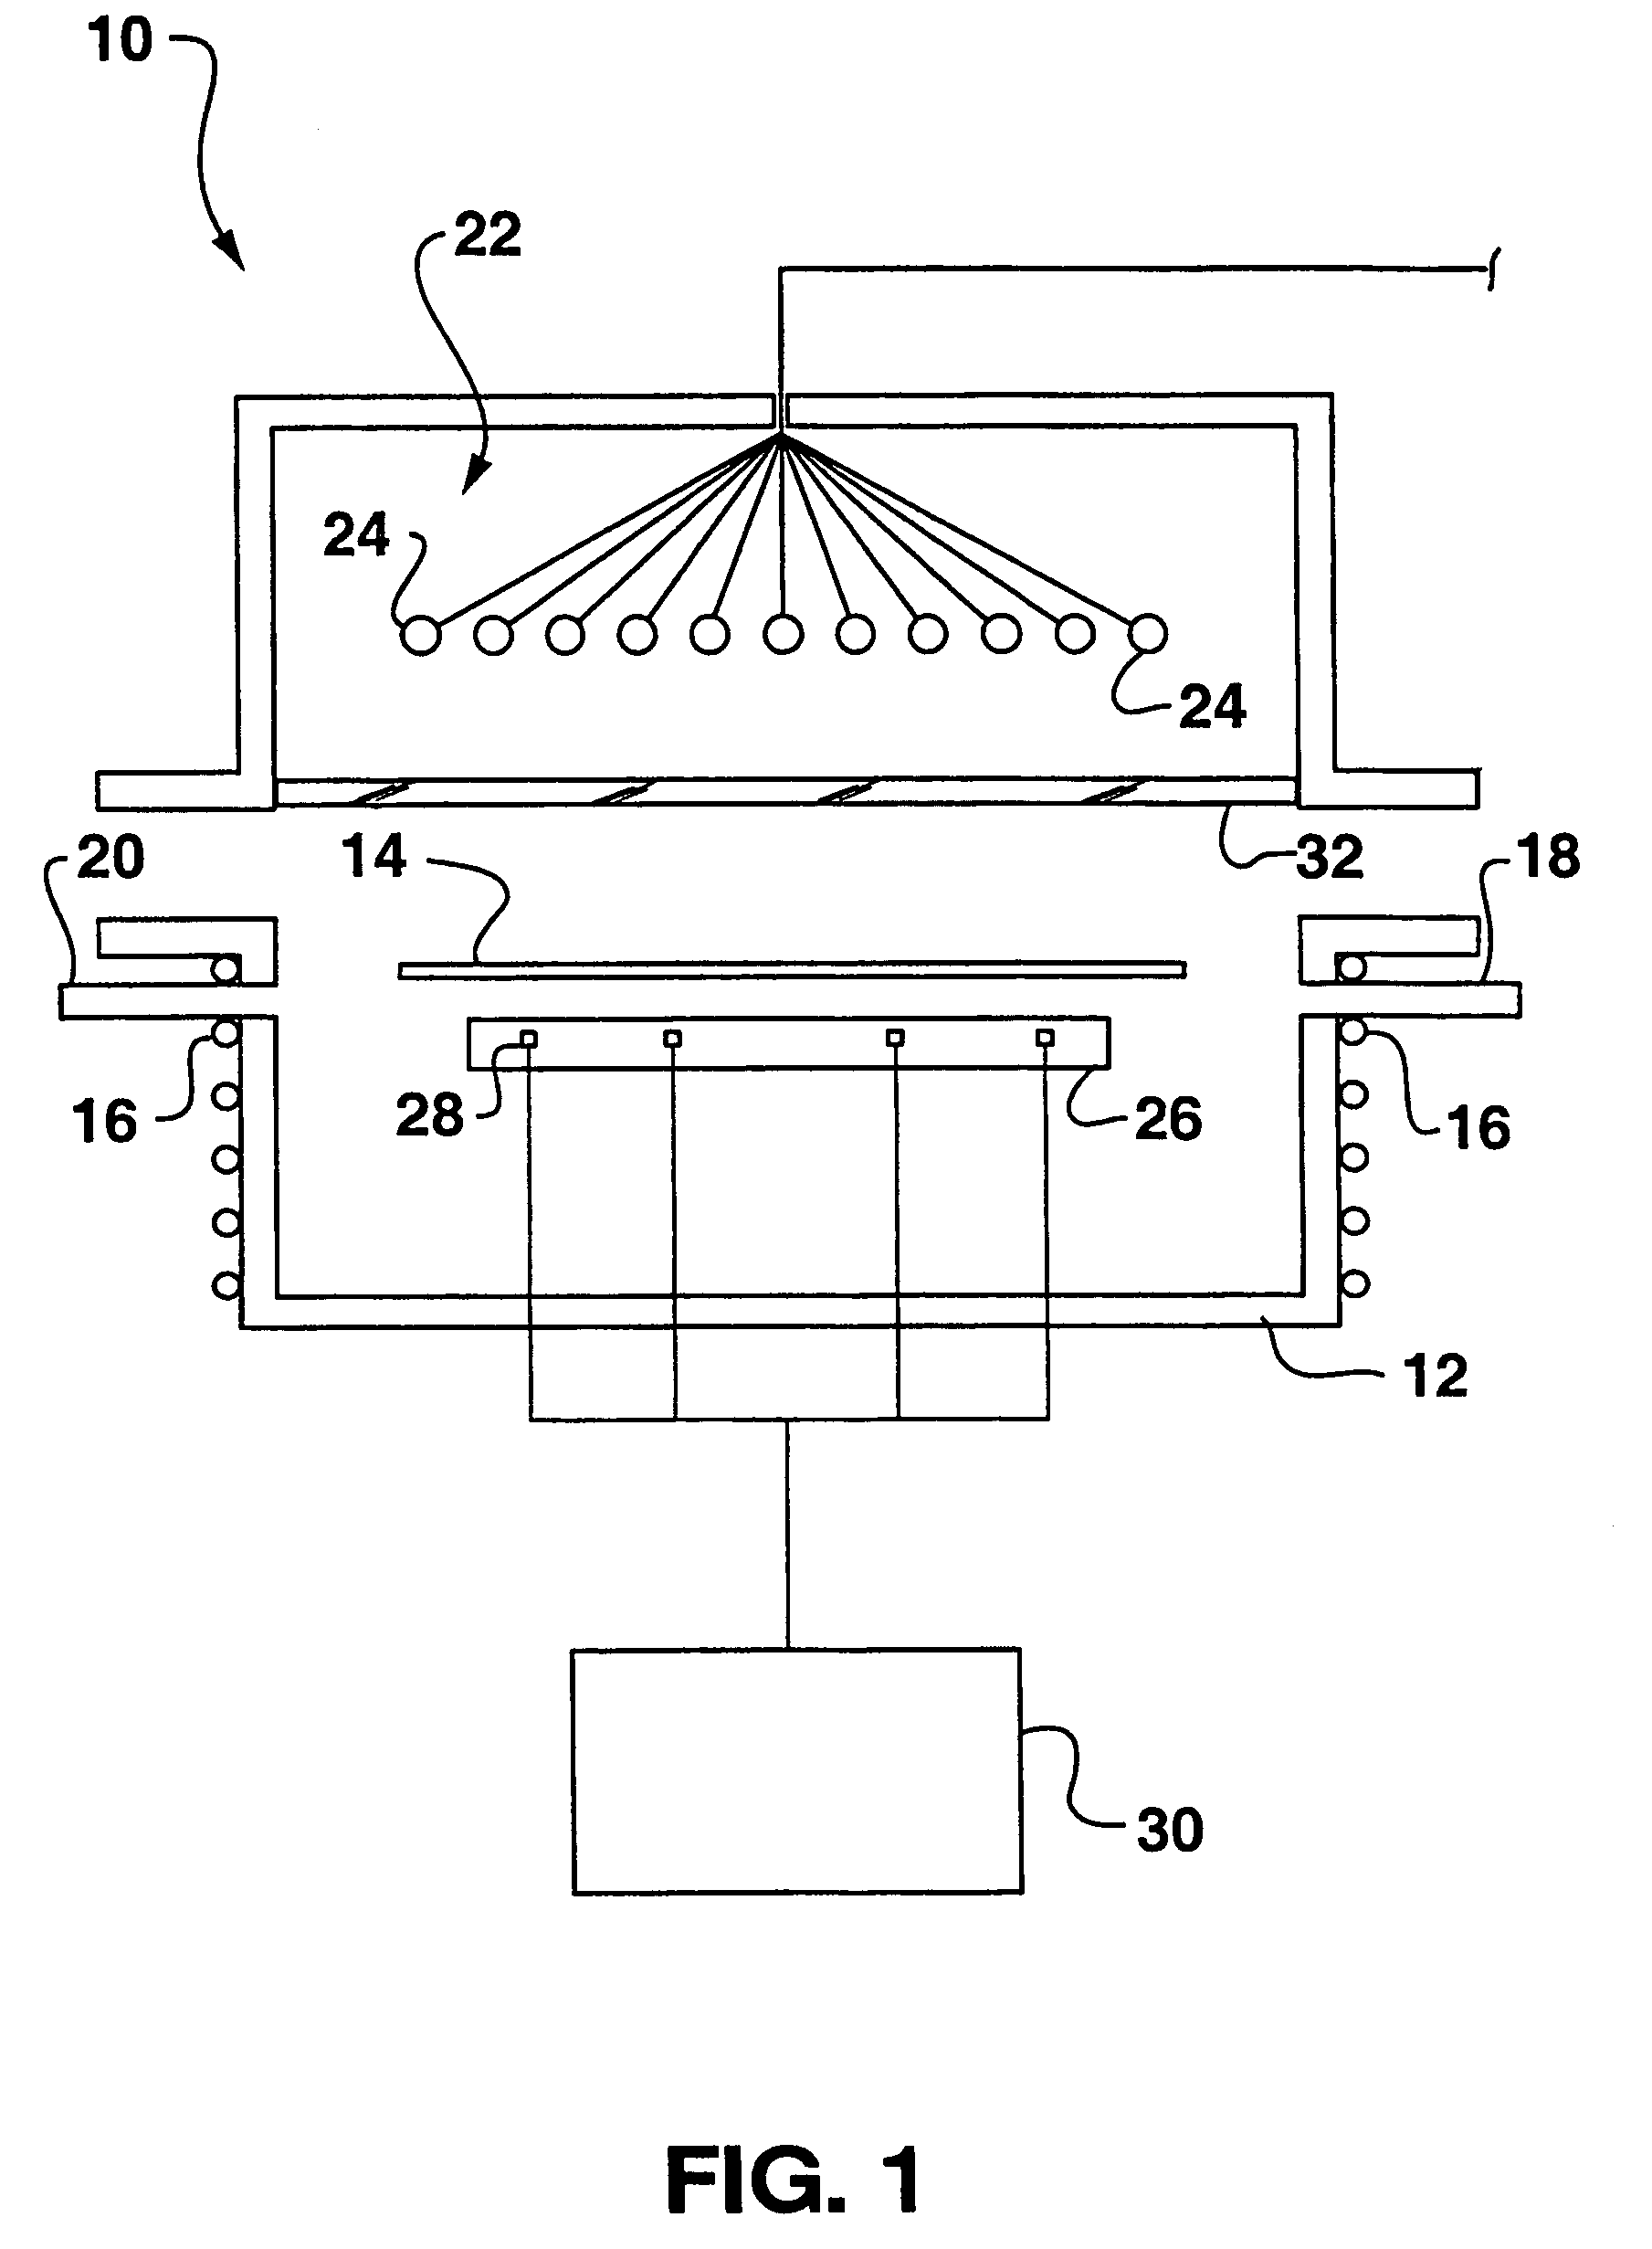 Apparatus and method for reducing stray light in substrate processing chambers